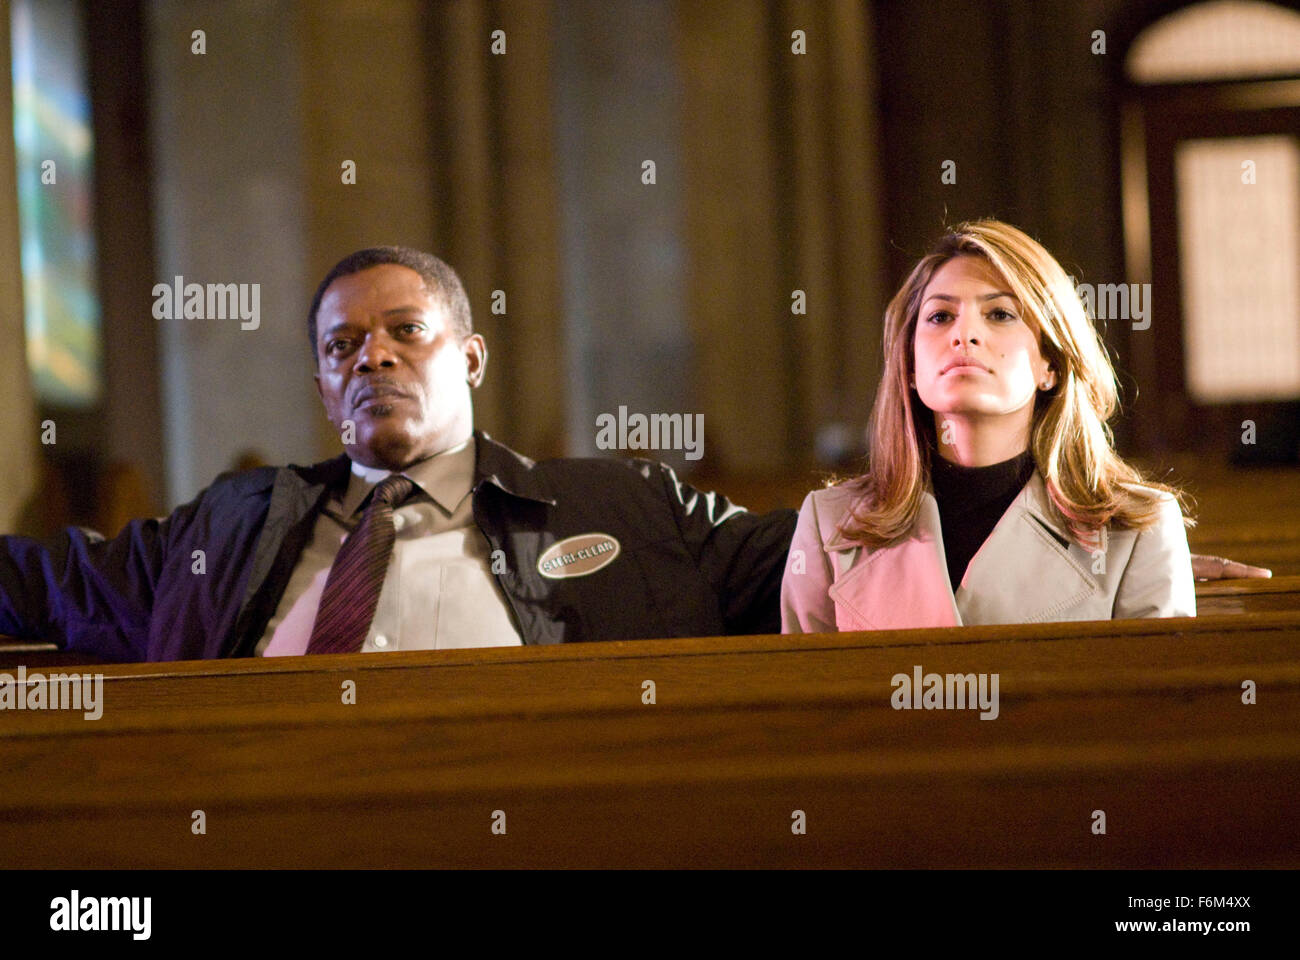 RELEASE DATE: May 27, 2008. MOVIE TITLE: Cleaner. STUDIO: Odeon. PLOT: A former cop who now earns a wage as a crime scene cleaner unknowingly participates in a cover-up at his latest job. PICTURED: SAMUEL L. JACKSON as Tom Carver and EVA MENDES as Ann Norcut. Stock Photo